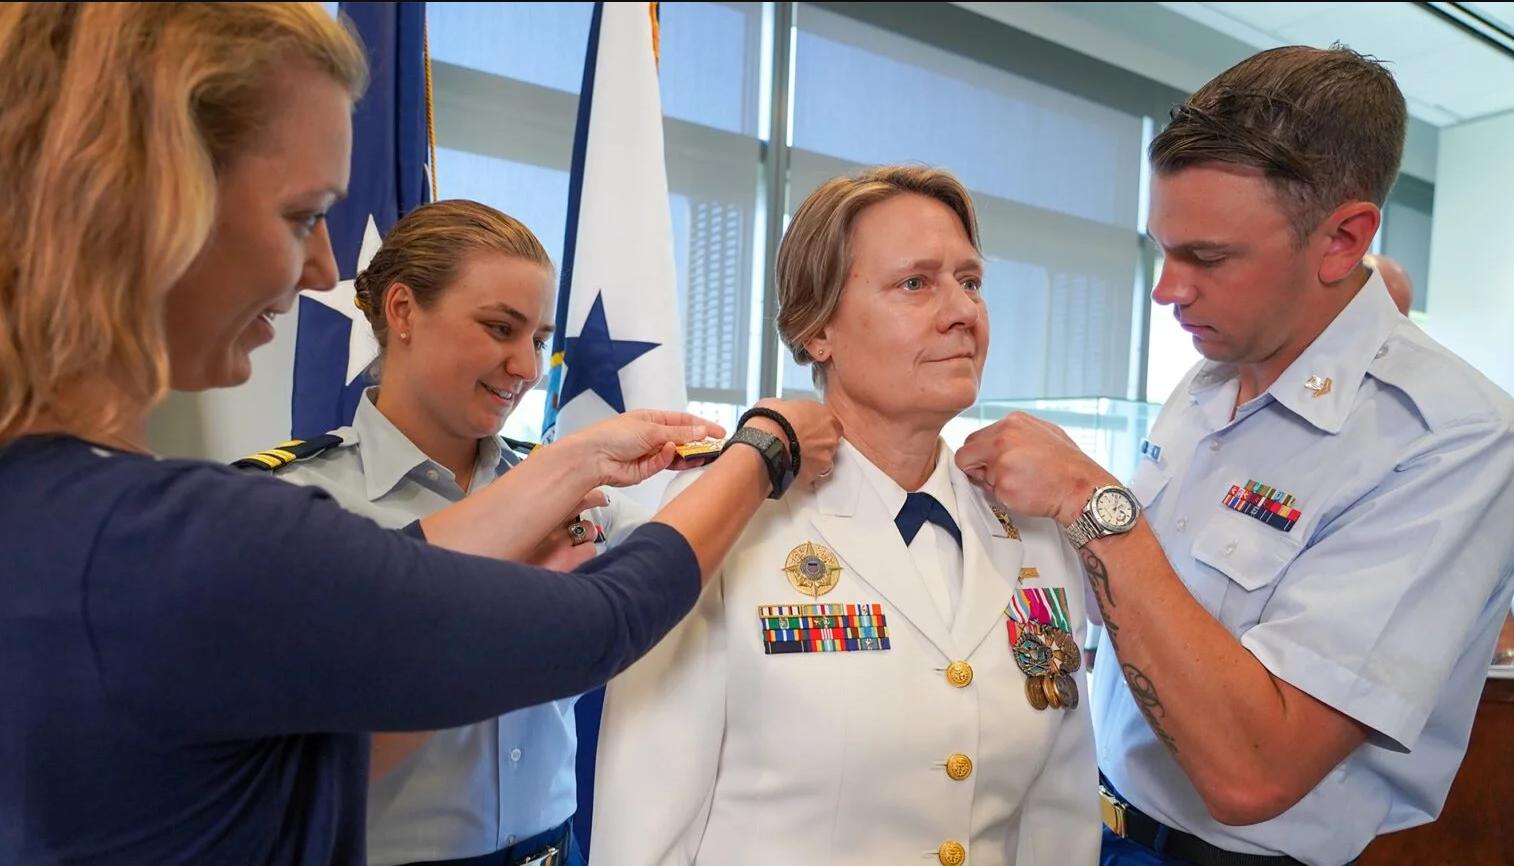 First woman to lead a branch of the military confirmed by Senate